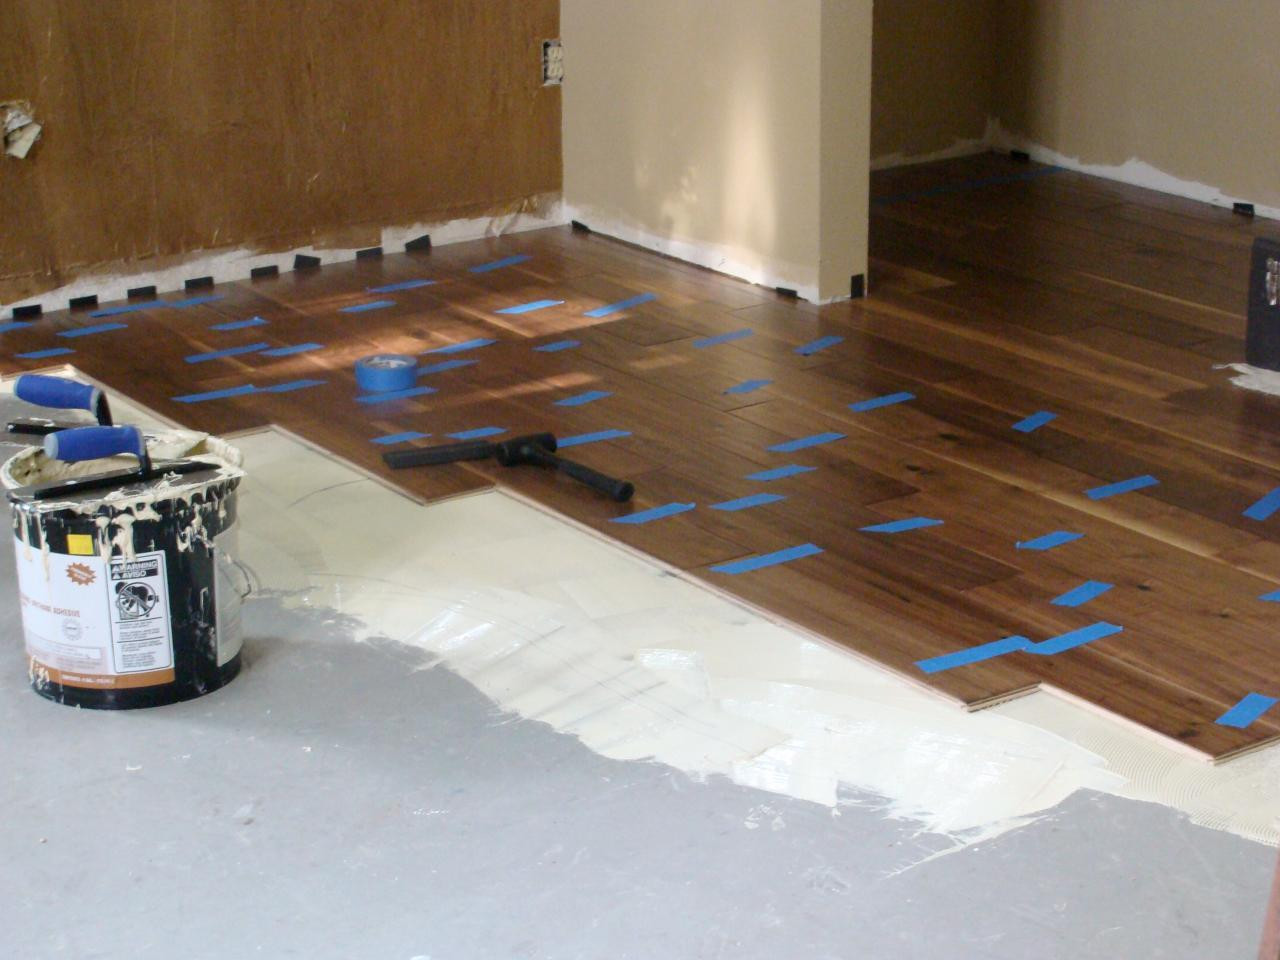 13 Recommended Hardwood Flooring Over Concrete Subfloor 2024 free download hardwood flooring over concrete subfloor of find the best diy wood flooring ideas amazing design intended for dhcr105 floor mallet boards s4x3